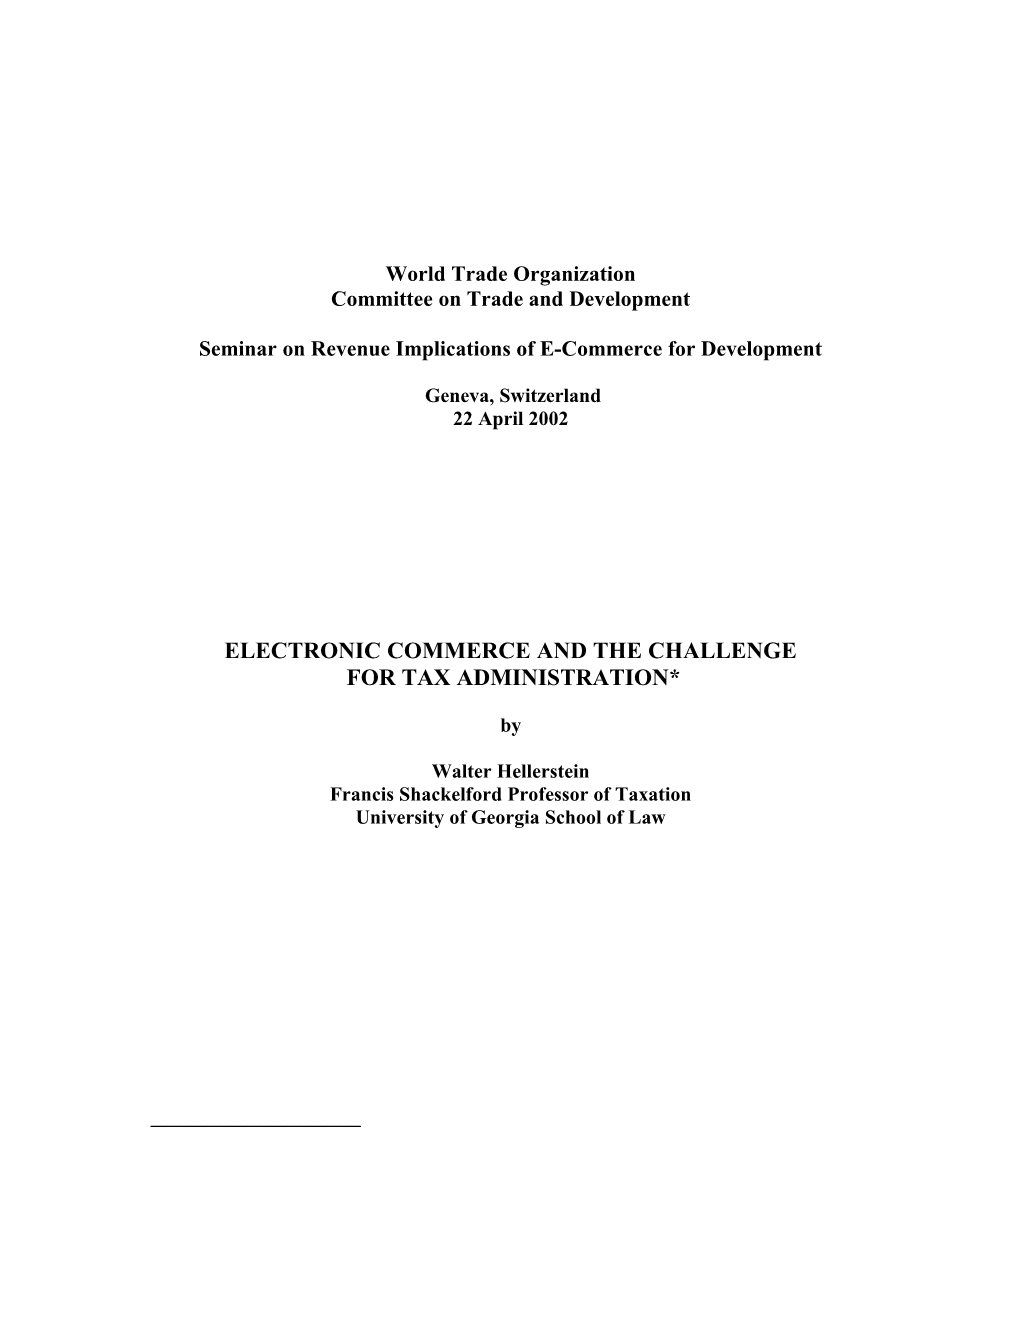 Electronic Commerce and the Challenge